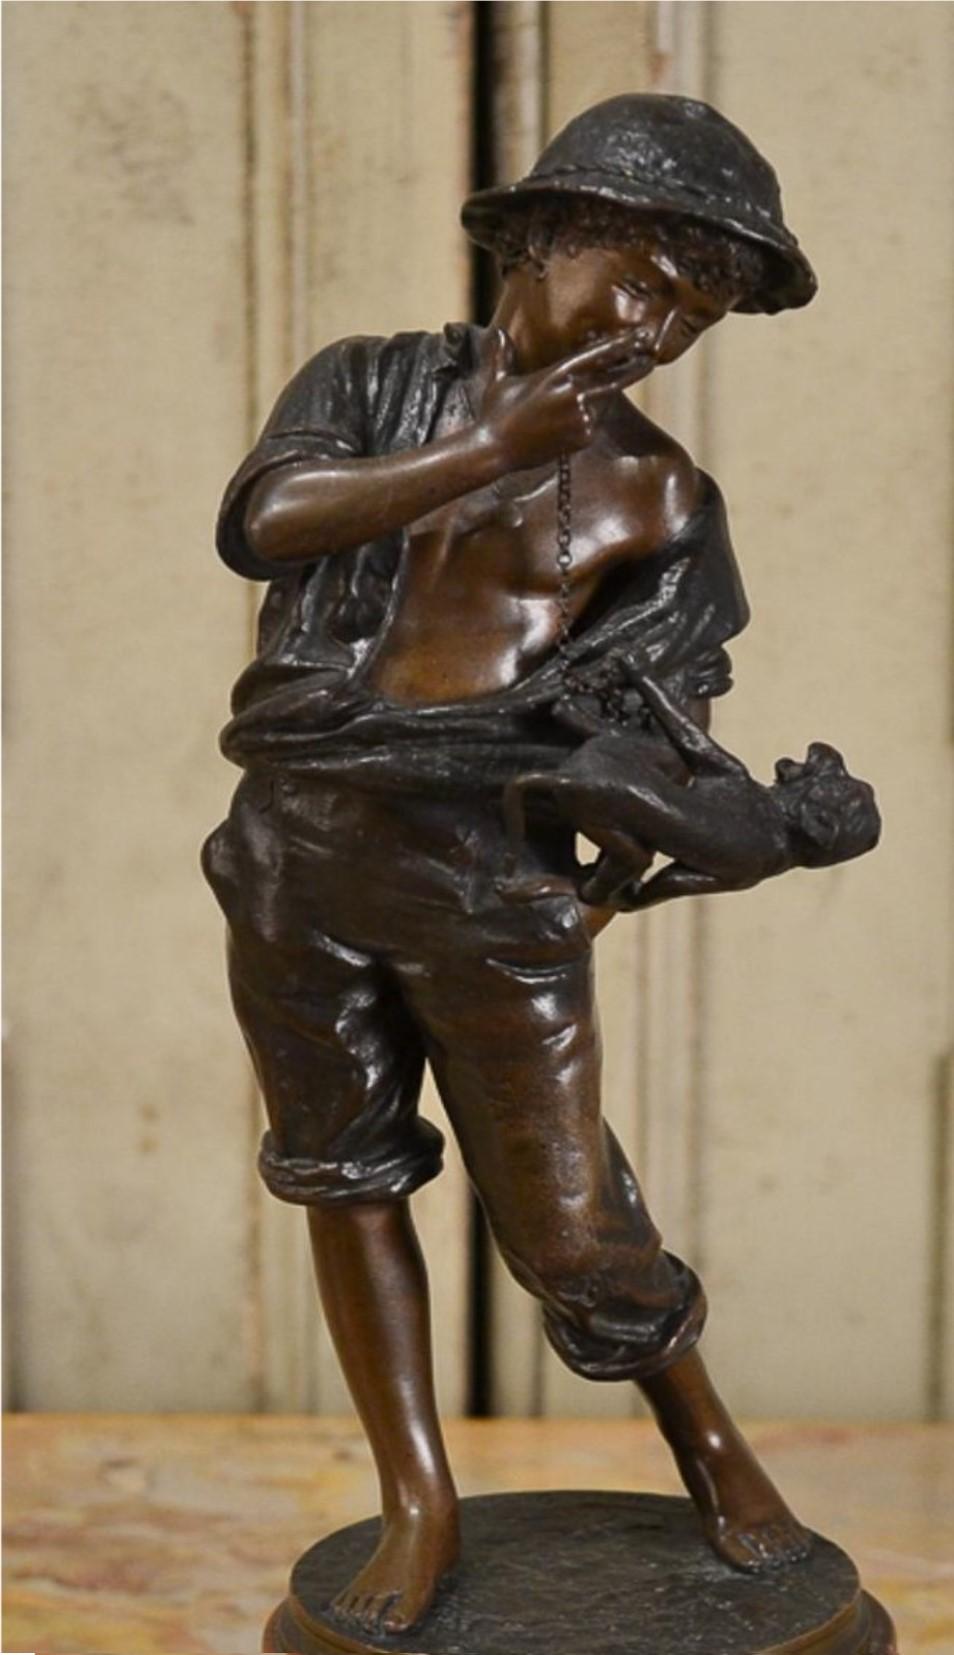 An Exquisite and Beautiful Museum Quality Estate Bronze boy holding monkey. The Bronze with a mid brown patina, depicting the young boy with the monkey hanging from his shirt, on circular base signed Wegener 94, and inscribed H. Gladenbeck & sohn,